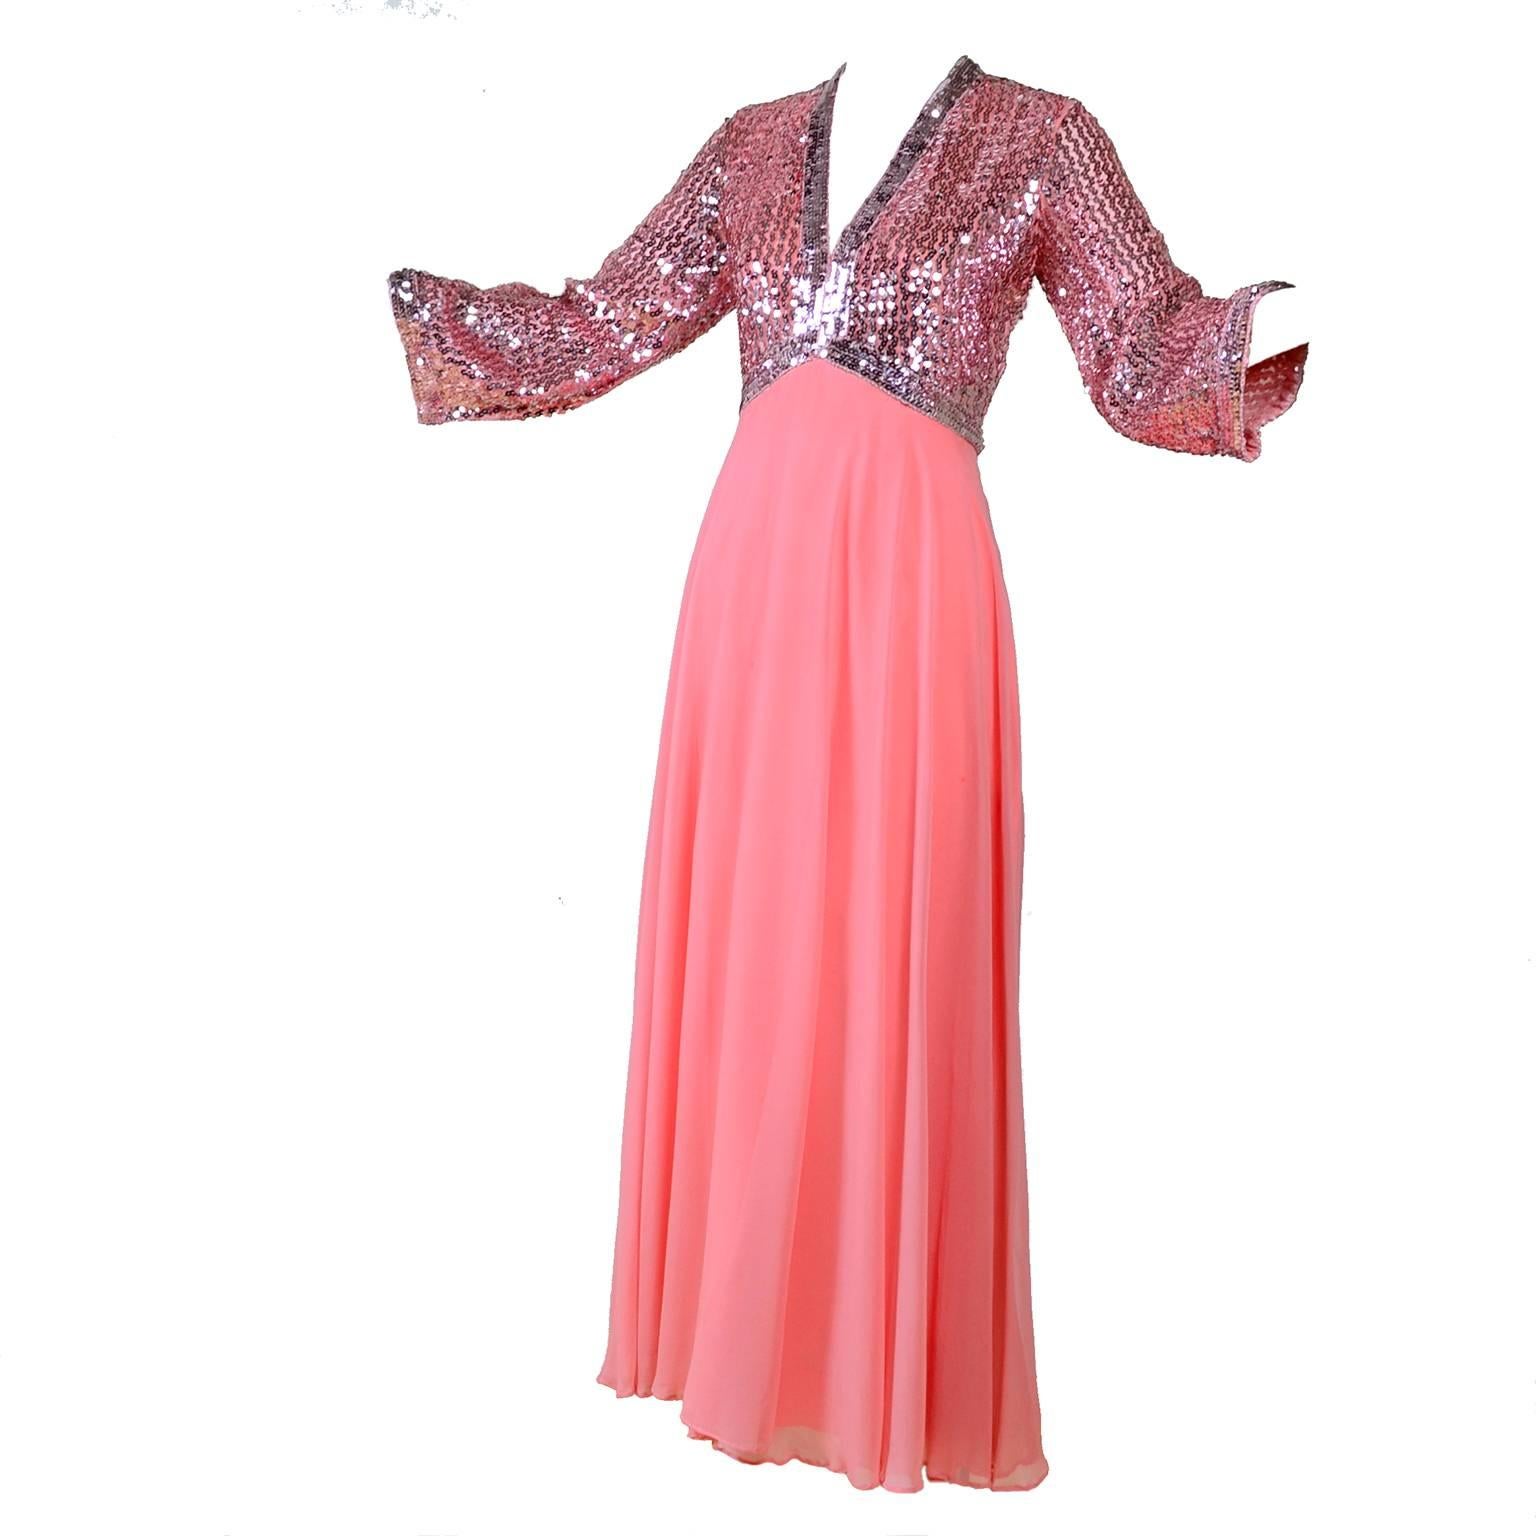 1970s Pink Chiffon & Sequins Vintage Long Dress Evening Gown